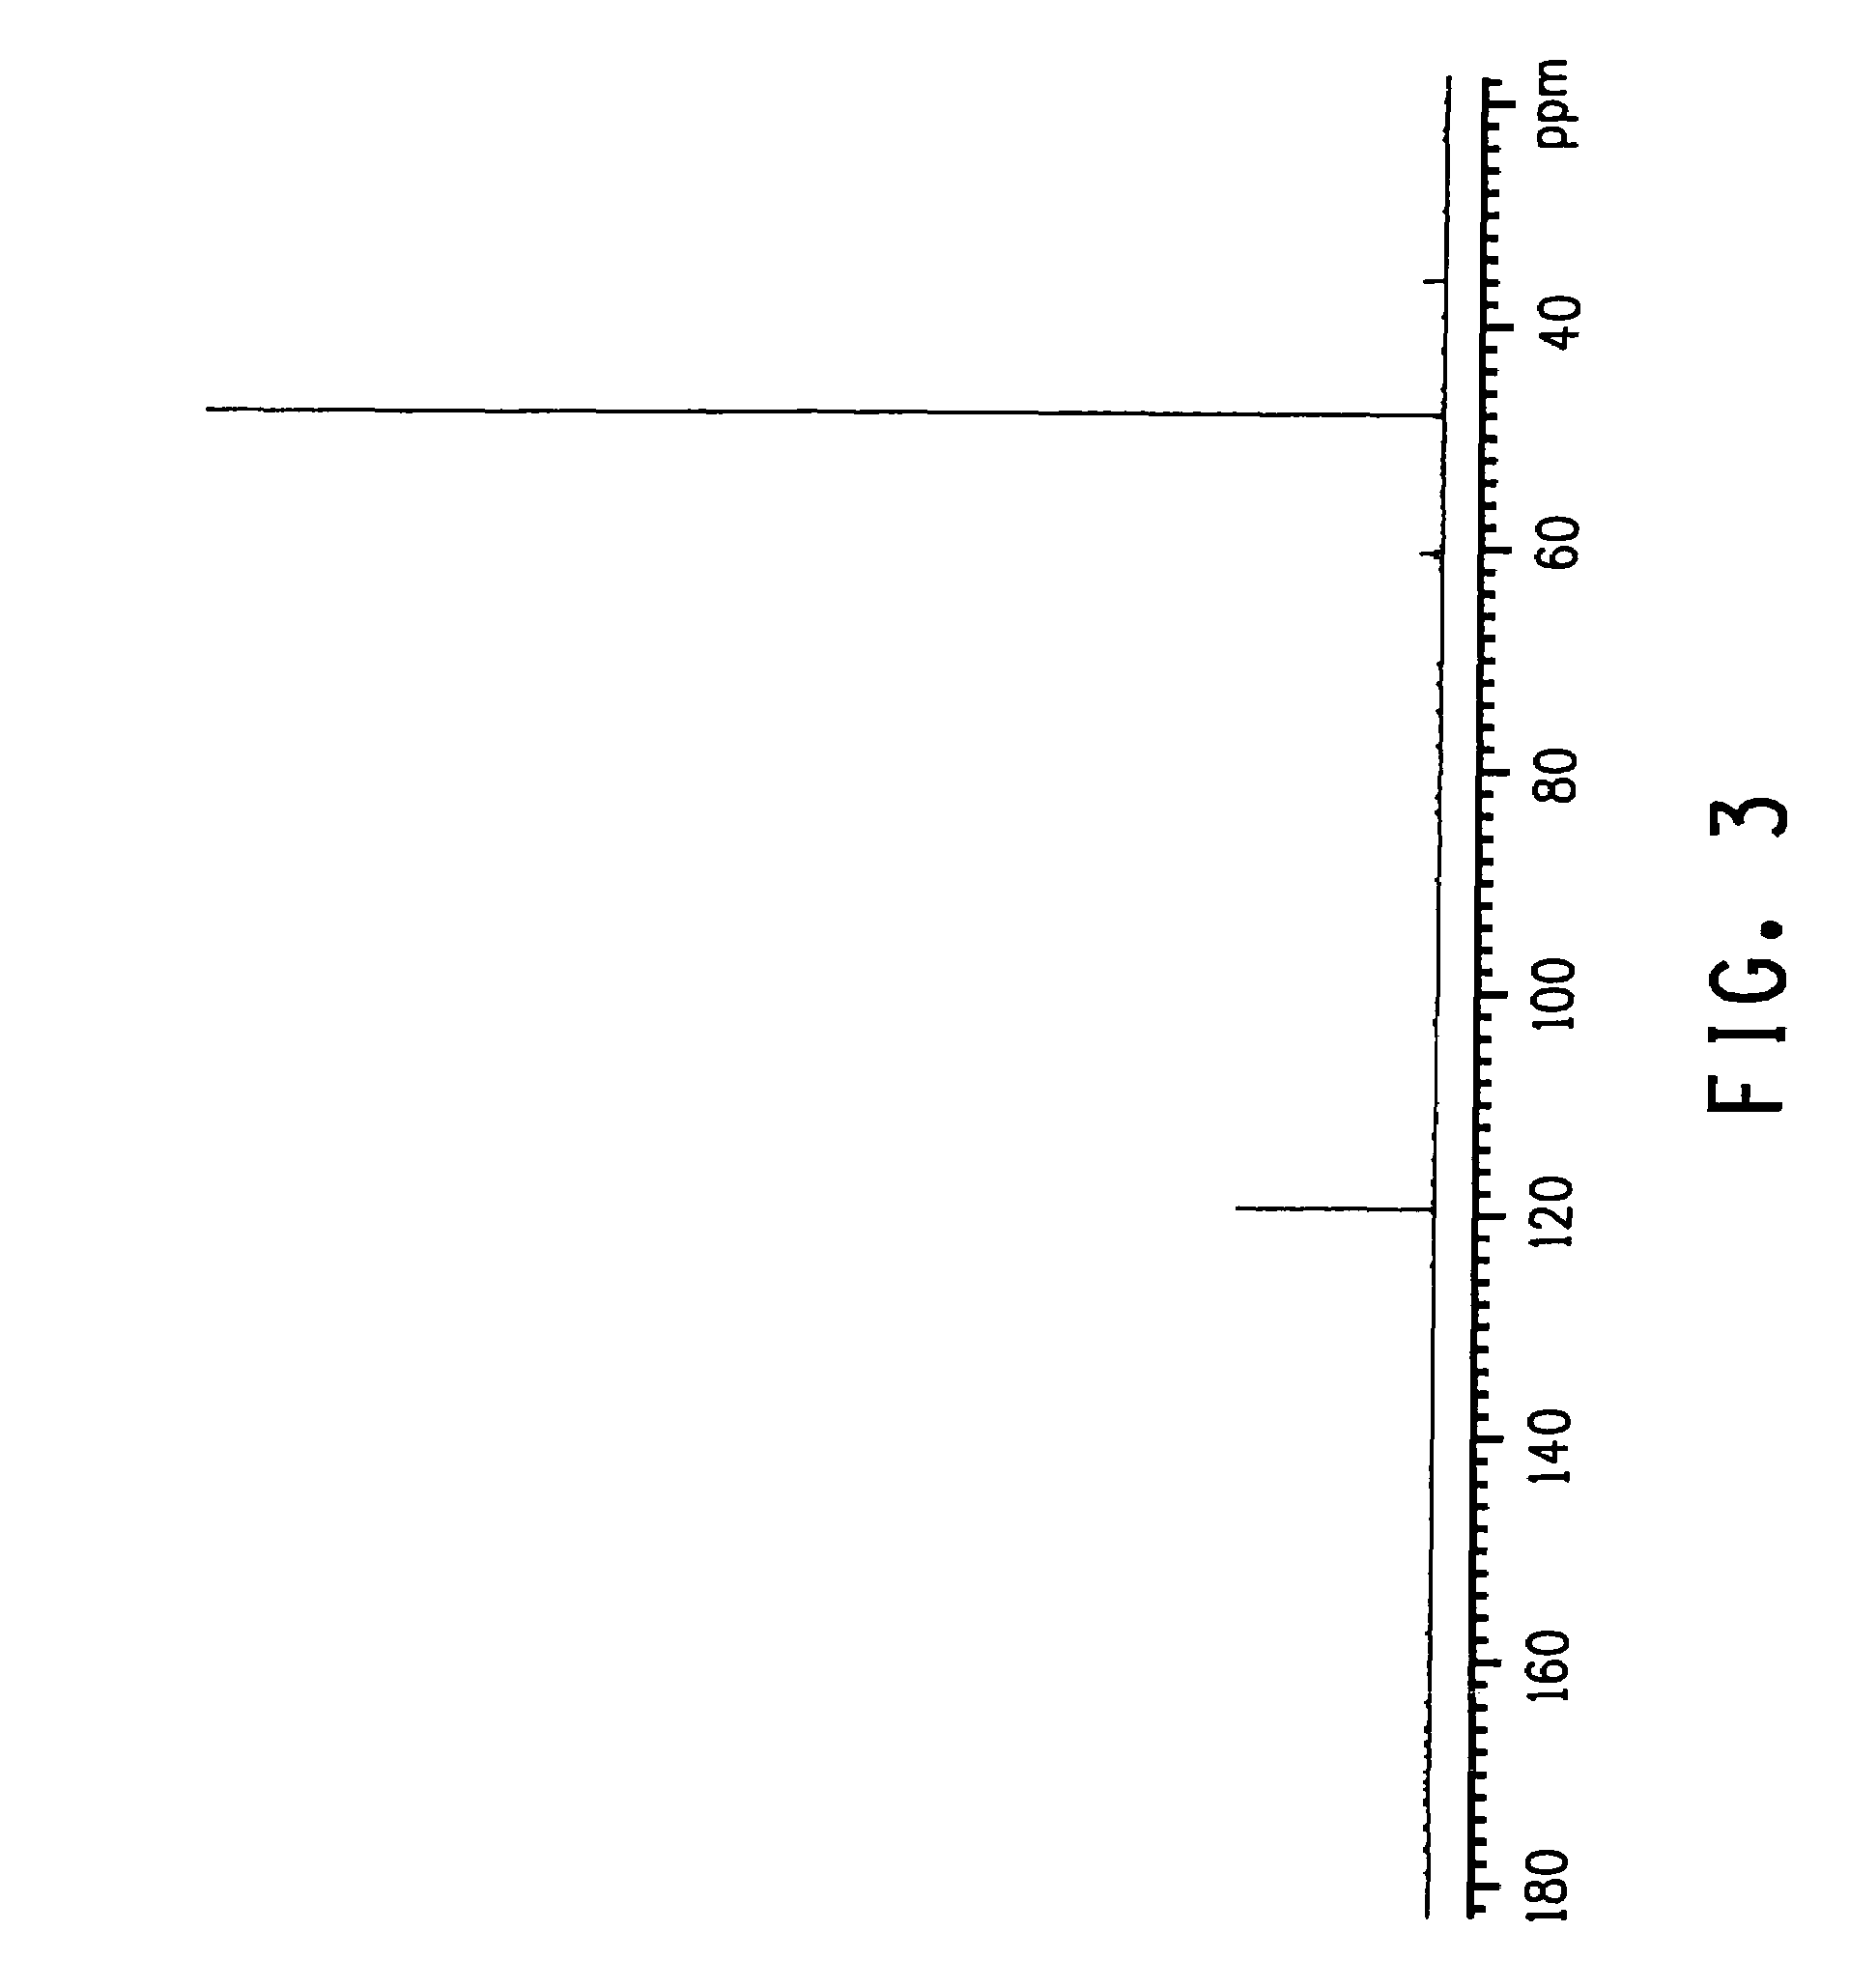 Process for producing glycolic acid from formaldehyde and hydrogen cyanide